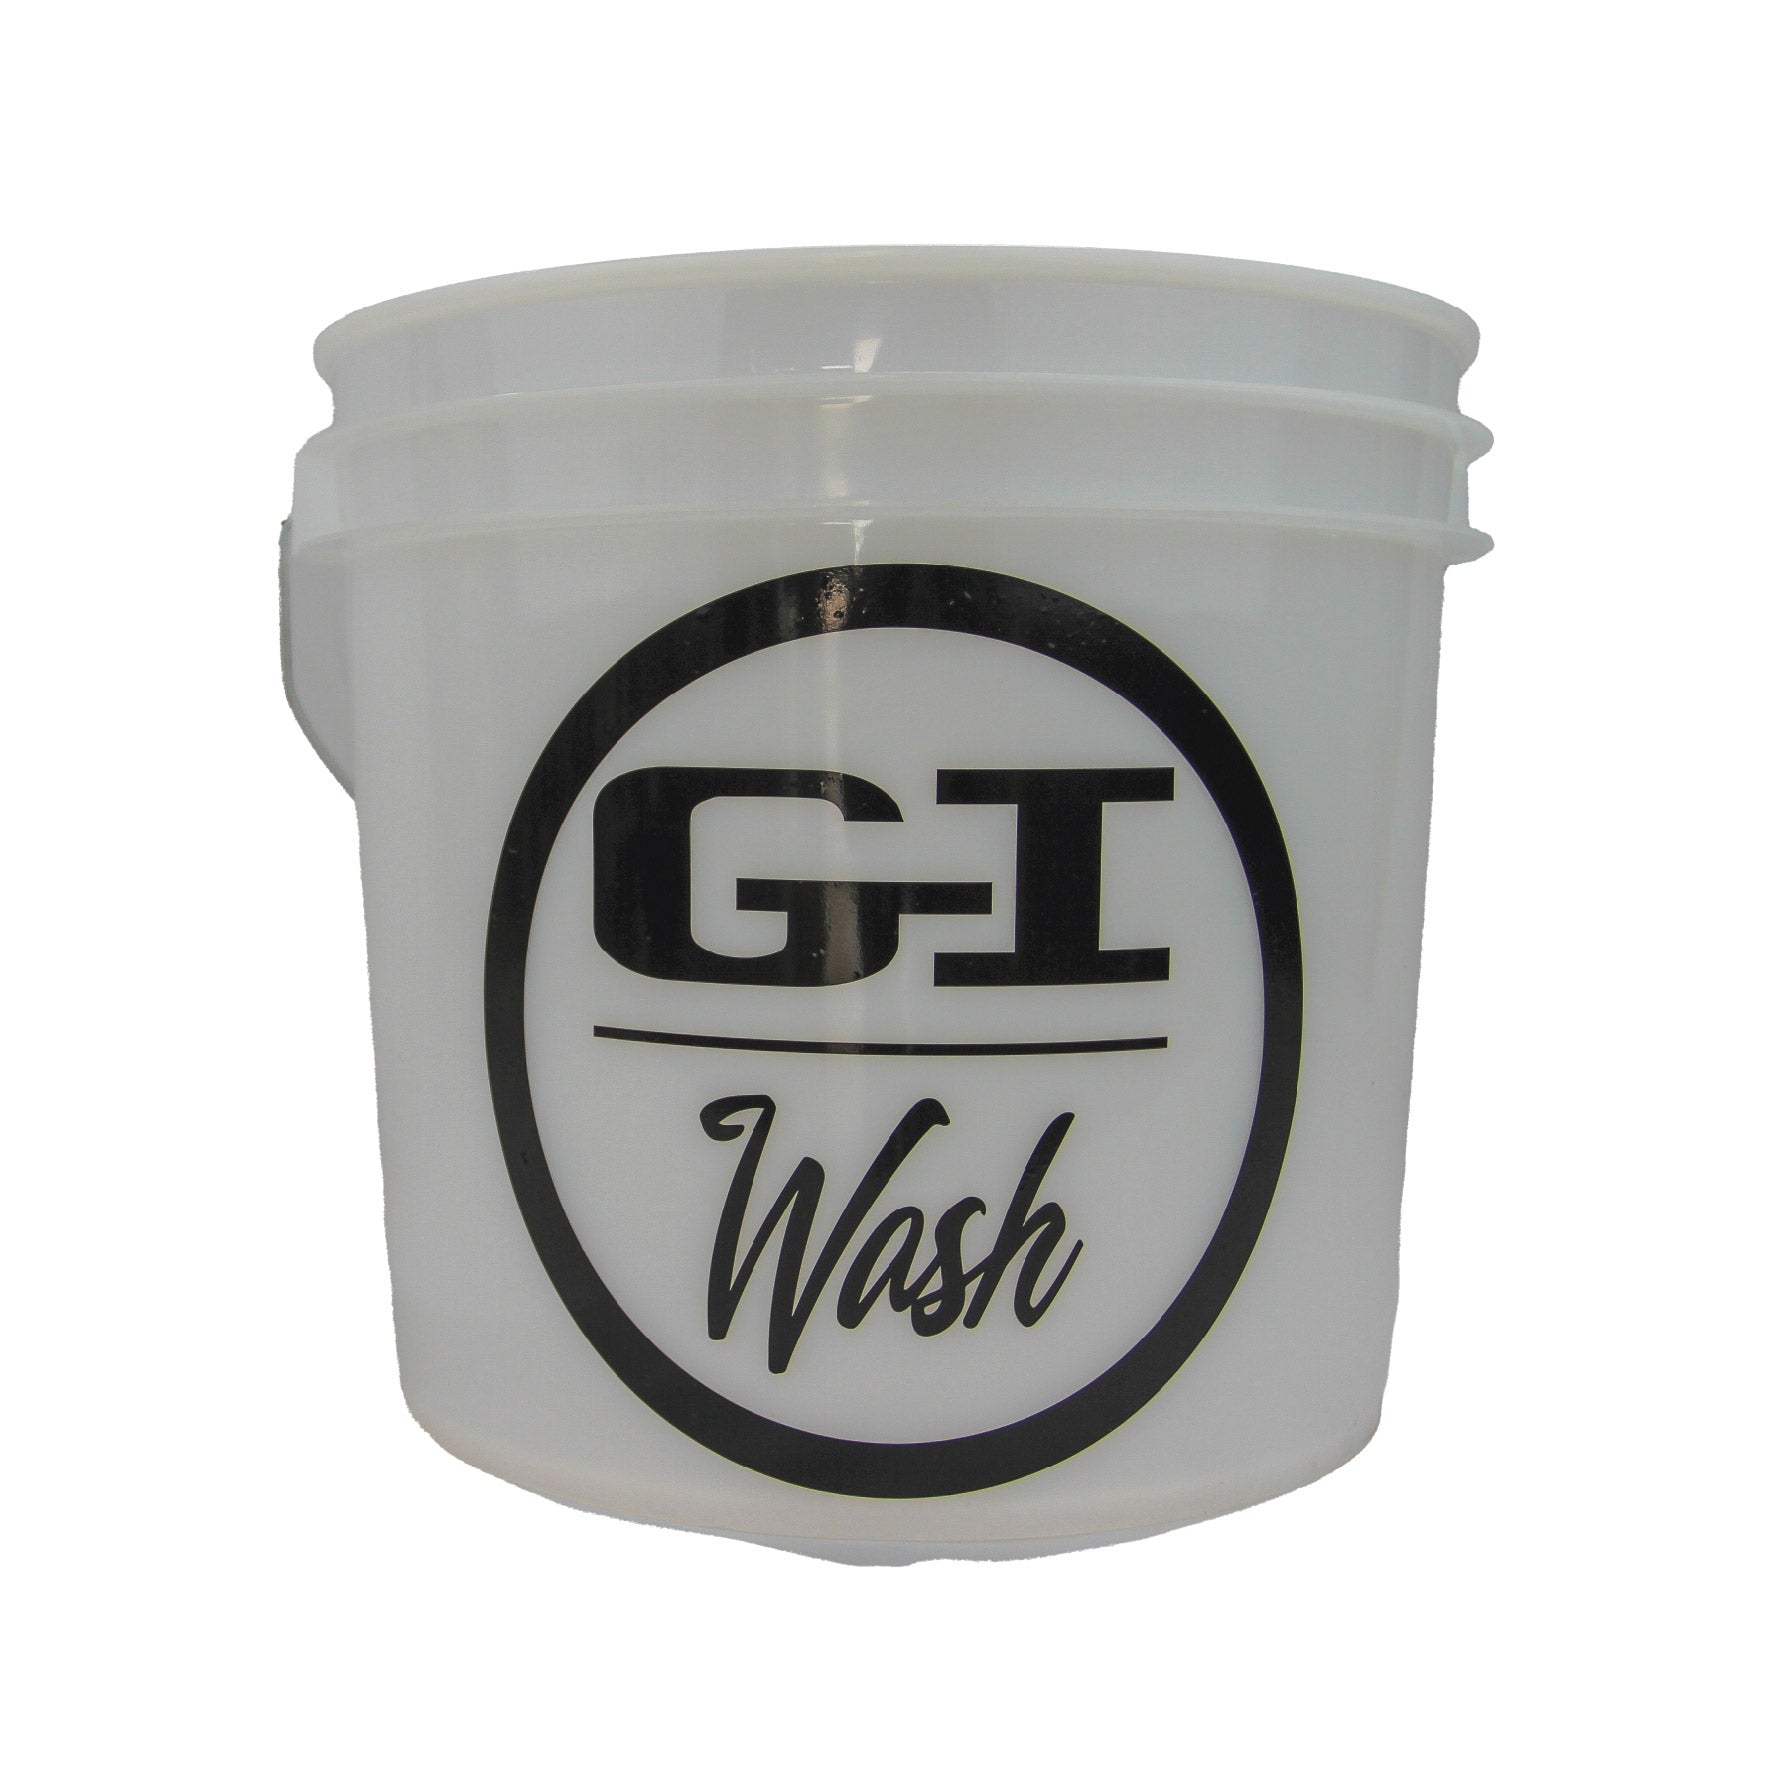 Signature Wheel Cleaner – Gloss It Products